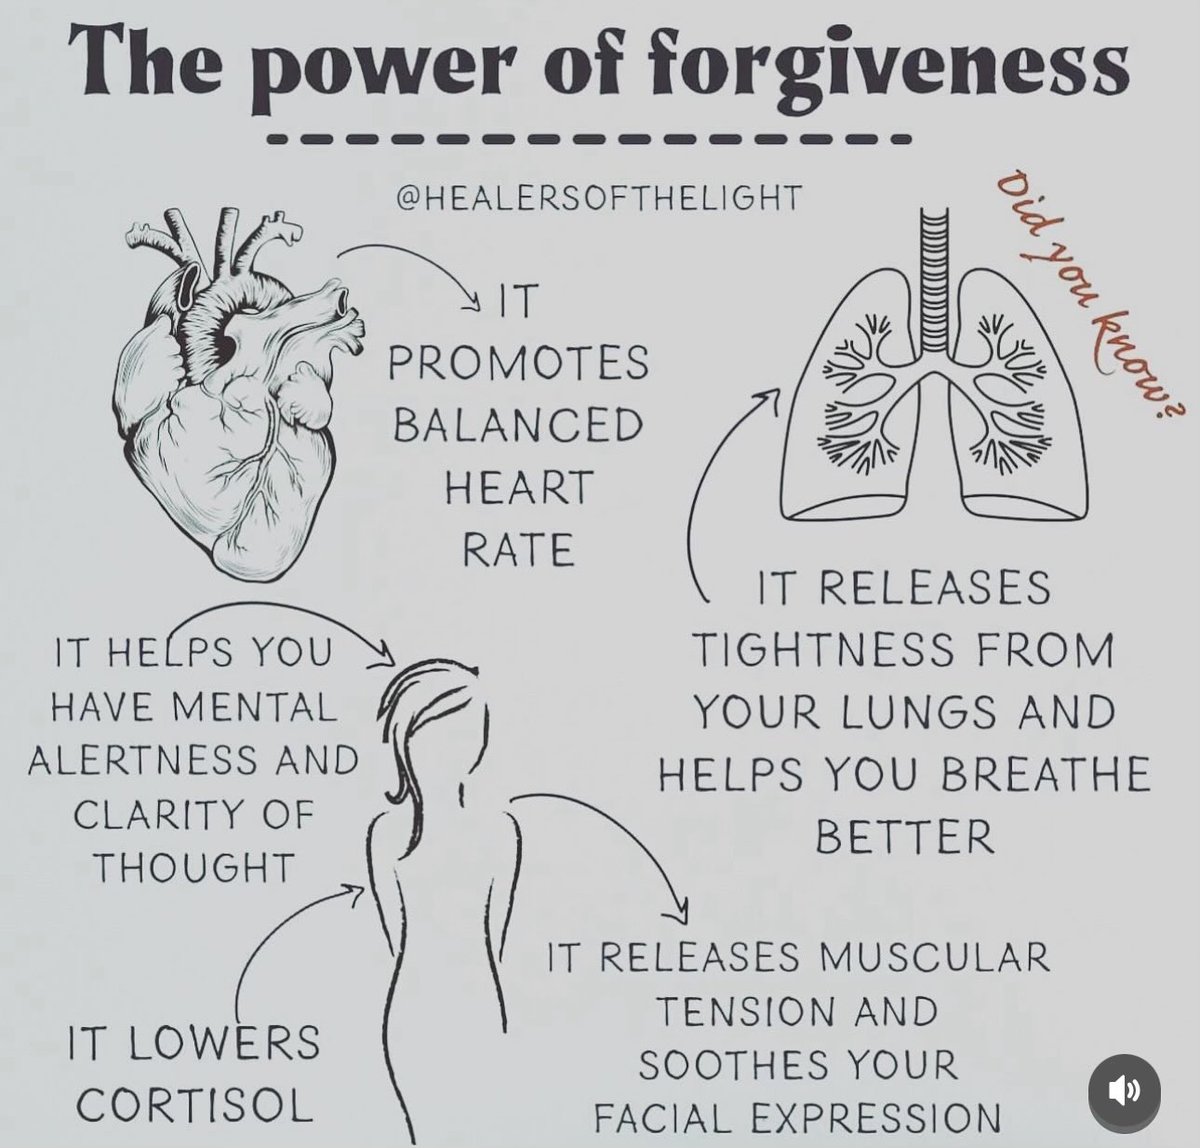 The power of #forgiveness and #love